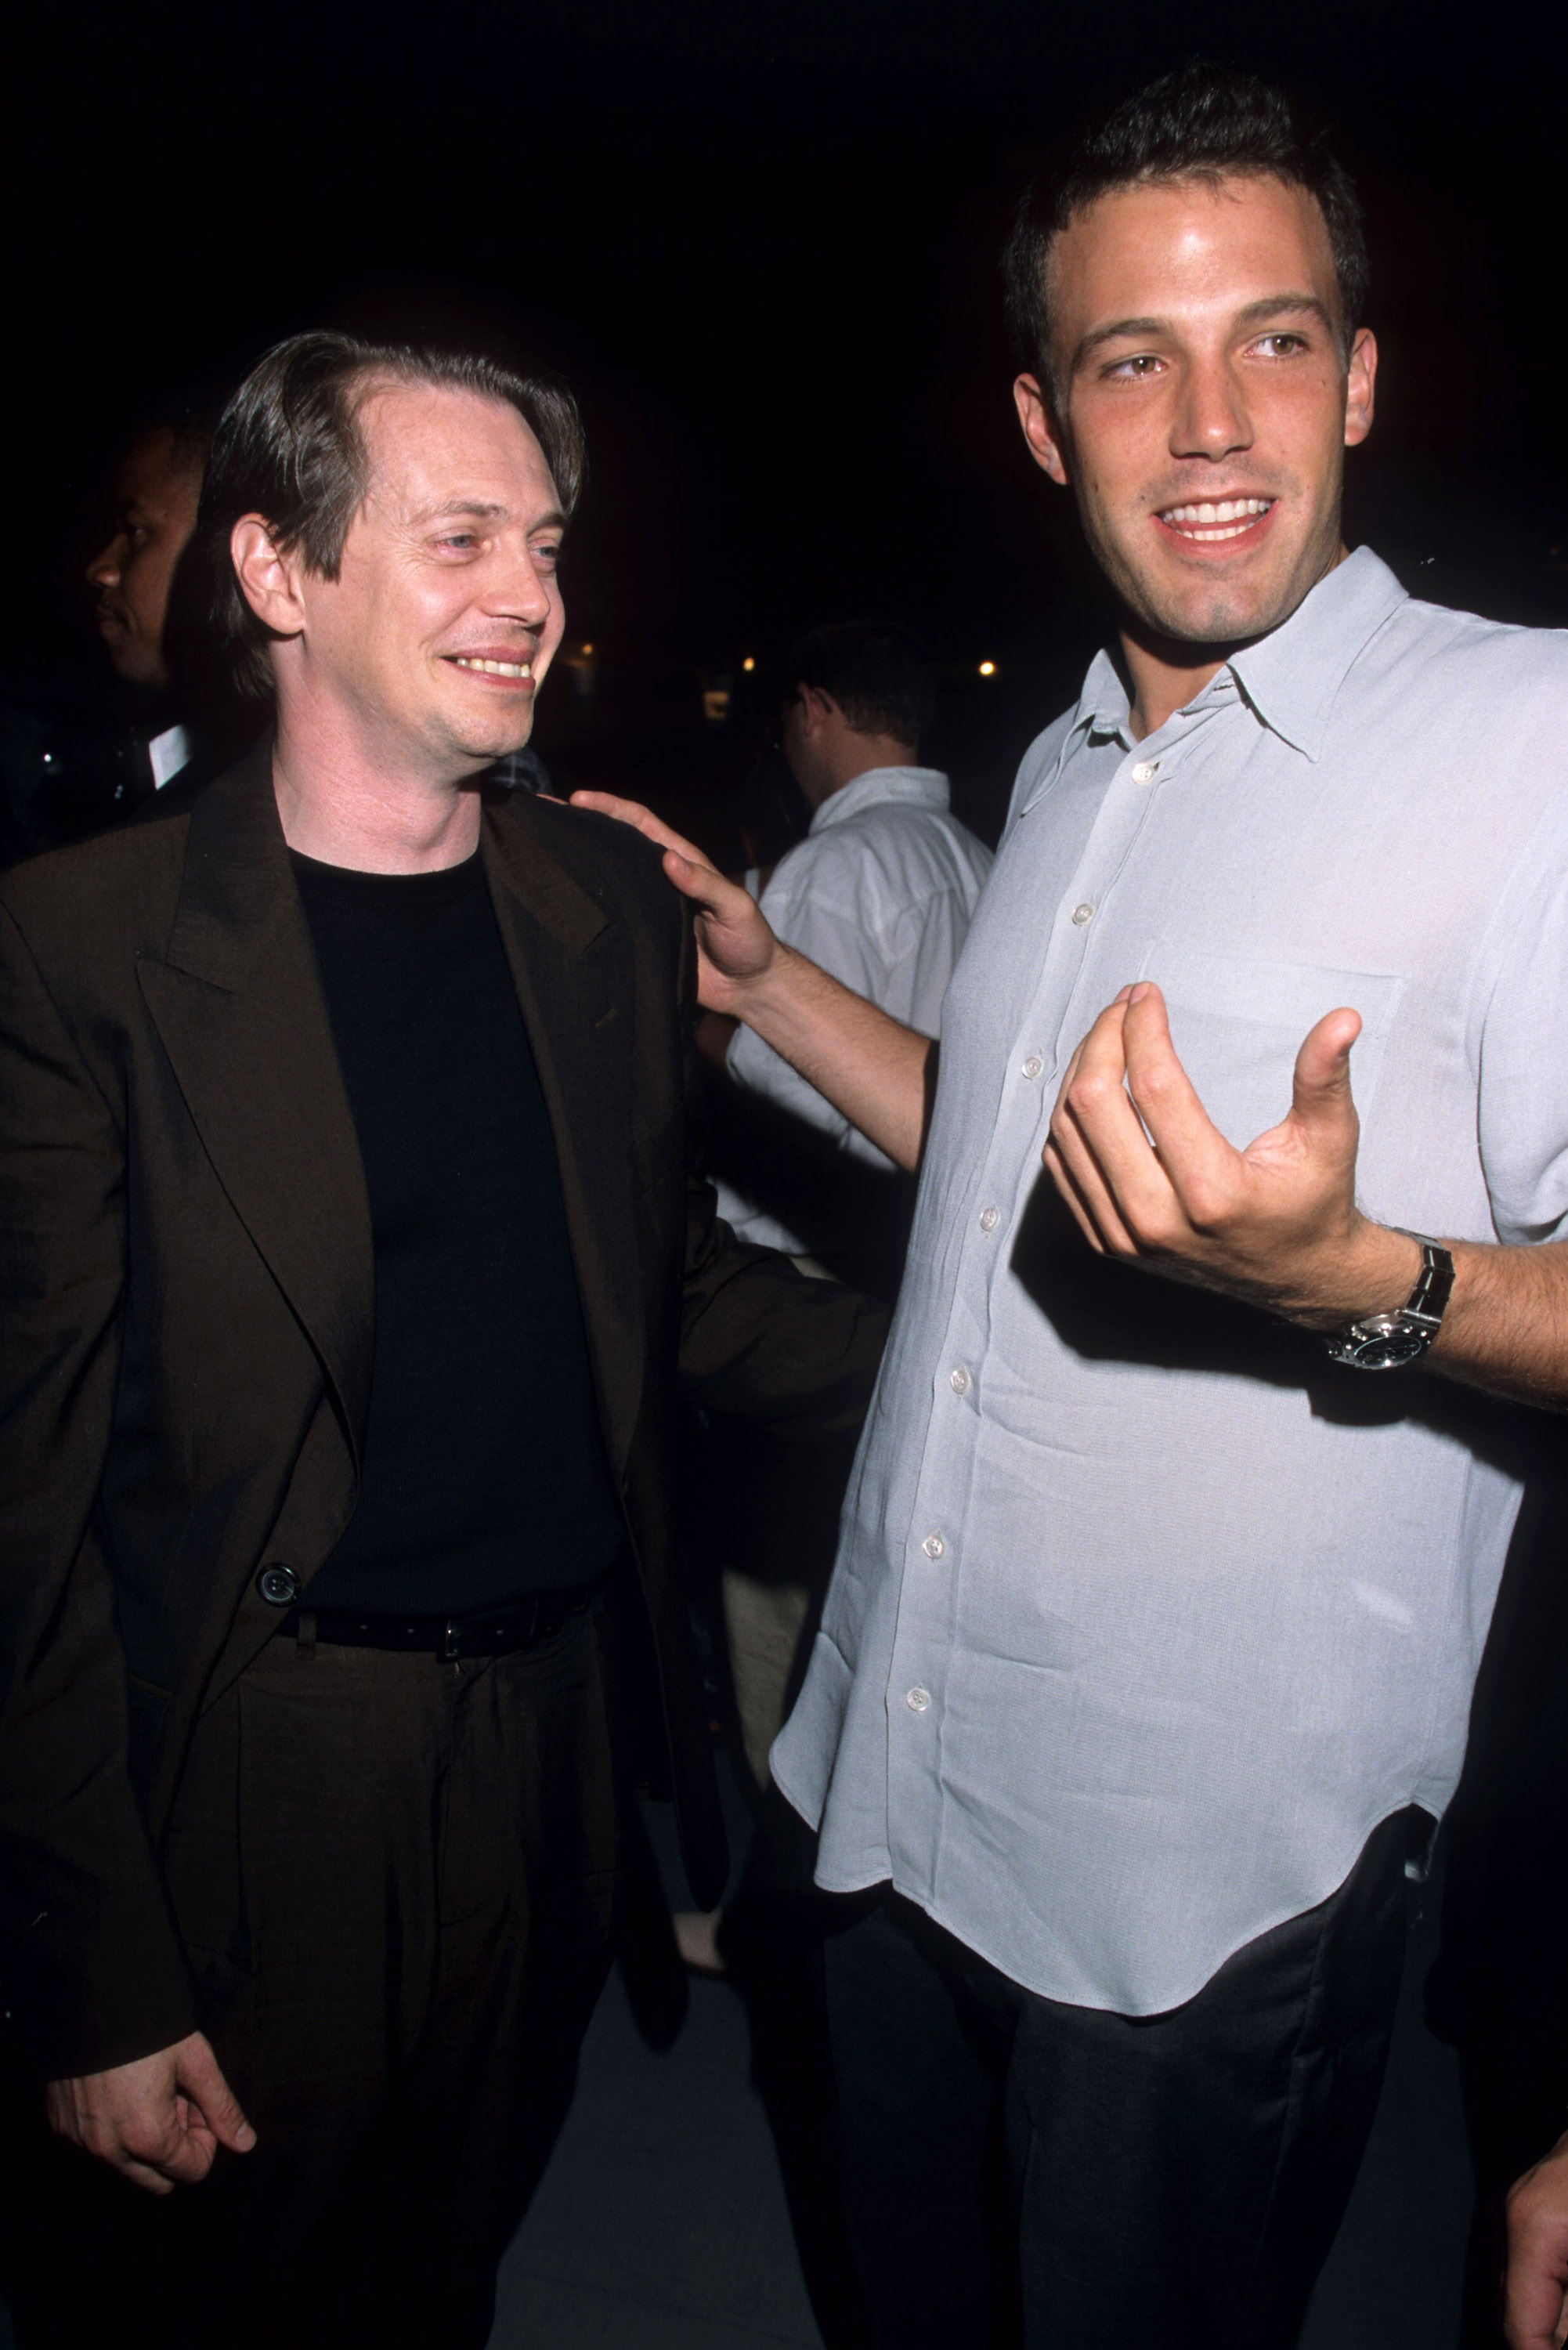 Ben Affleck with co-star Steve Buscemi at the premiere of "Armageddon" at Mann Village Theatre in West Hollywood, California on June 30, 1998 | Source: Getty Images